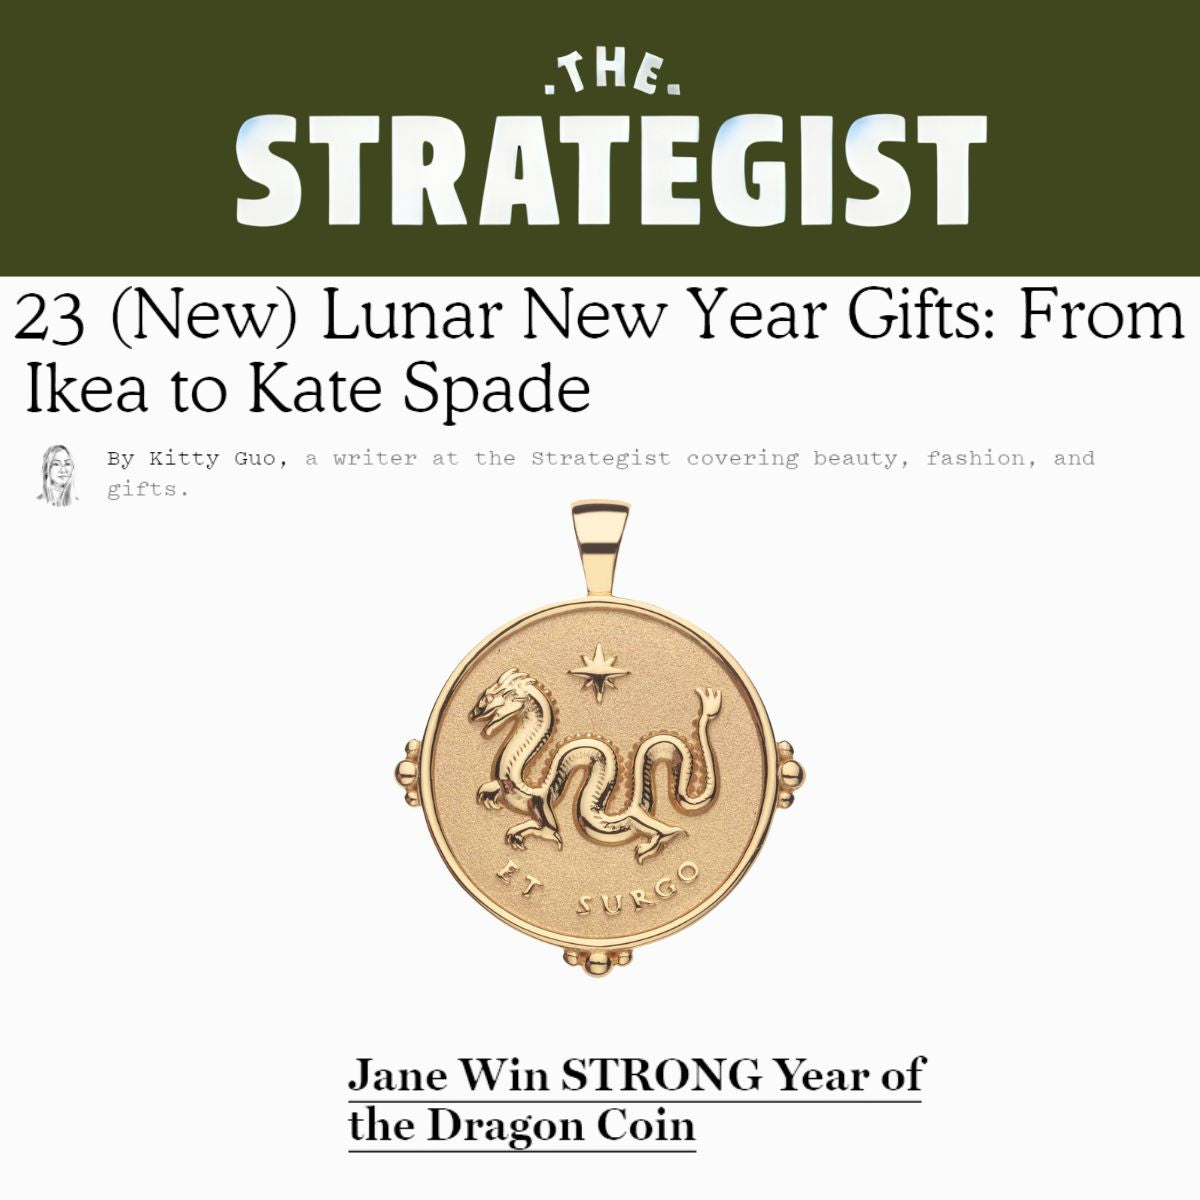 Press Highlight: The Strategist's "23 (New) Lunar New Year Gifts: From Ikea to Kate Spade